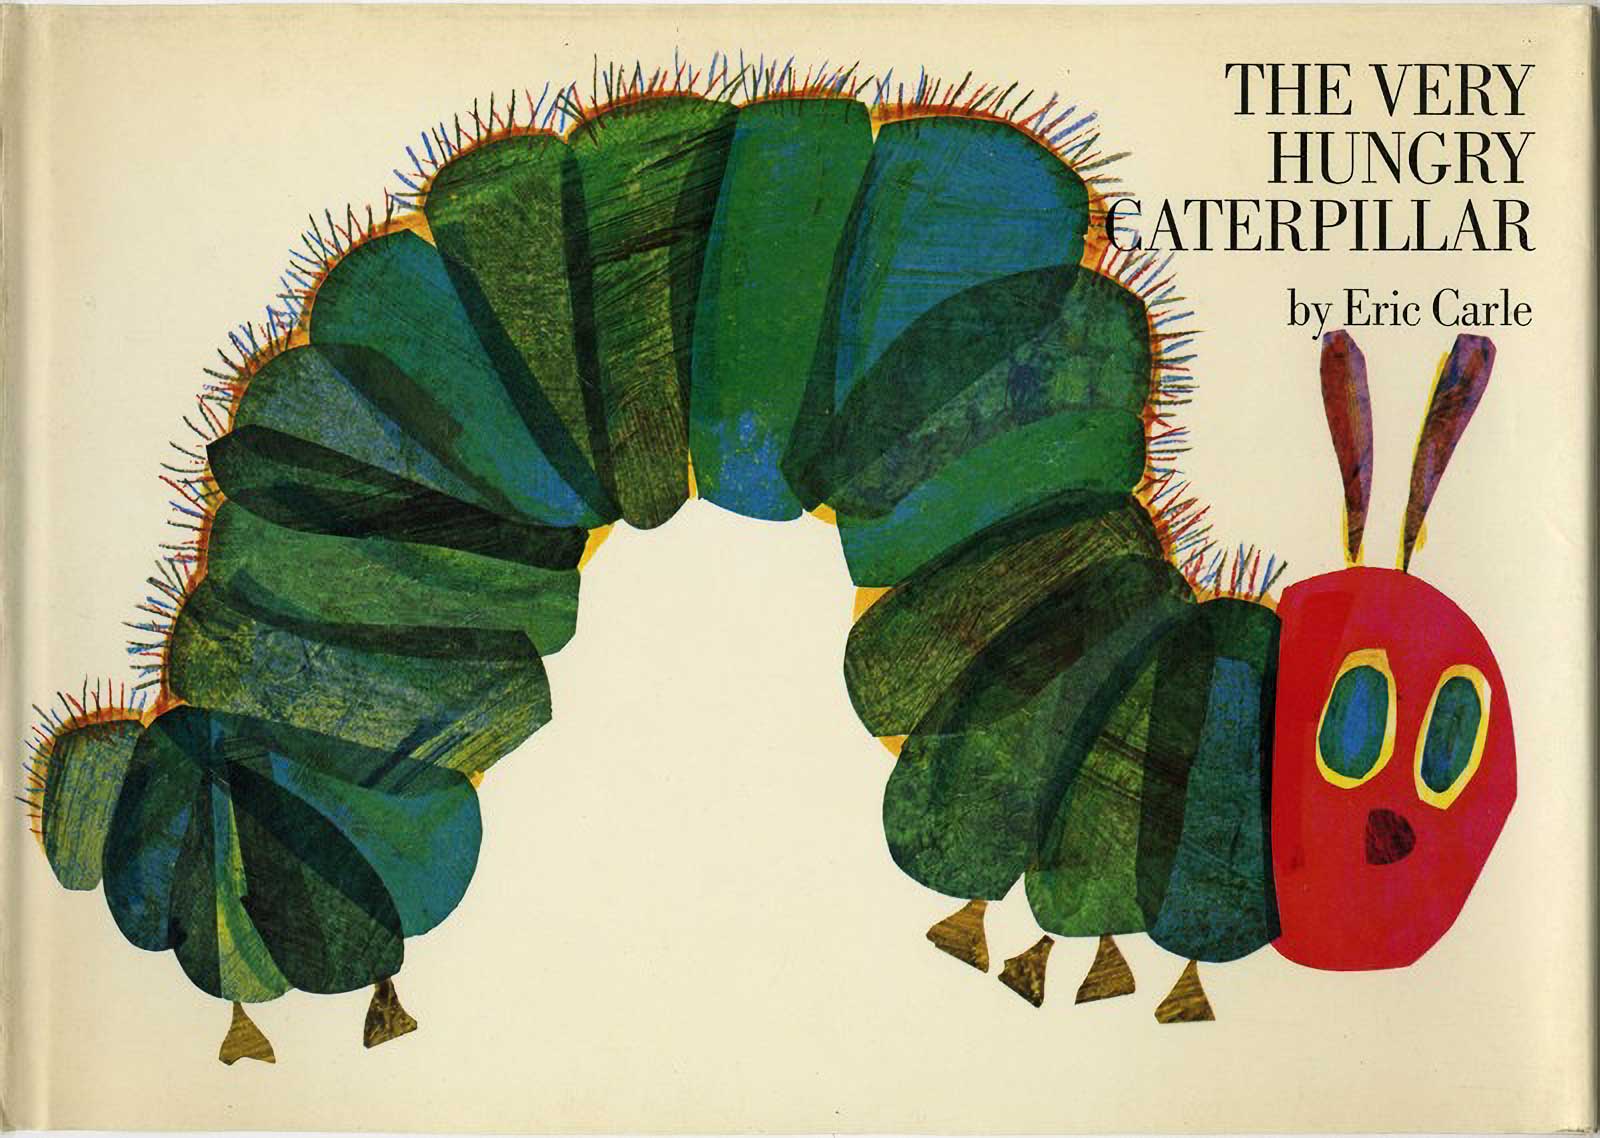 It's at the Kerlan: Eric Carle and 'The Very Hungry Caterpillar' - The ...